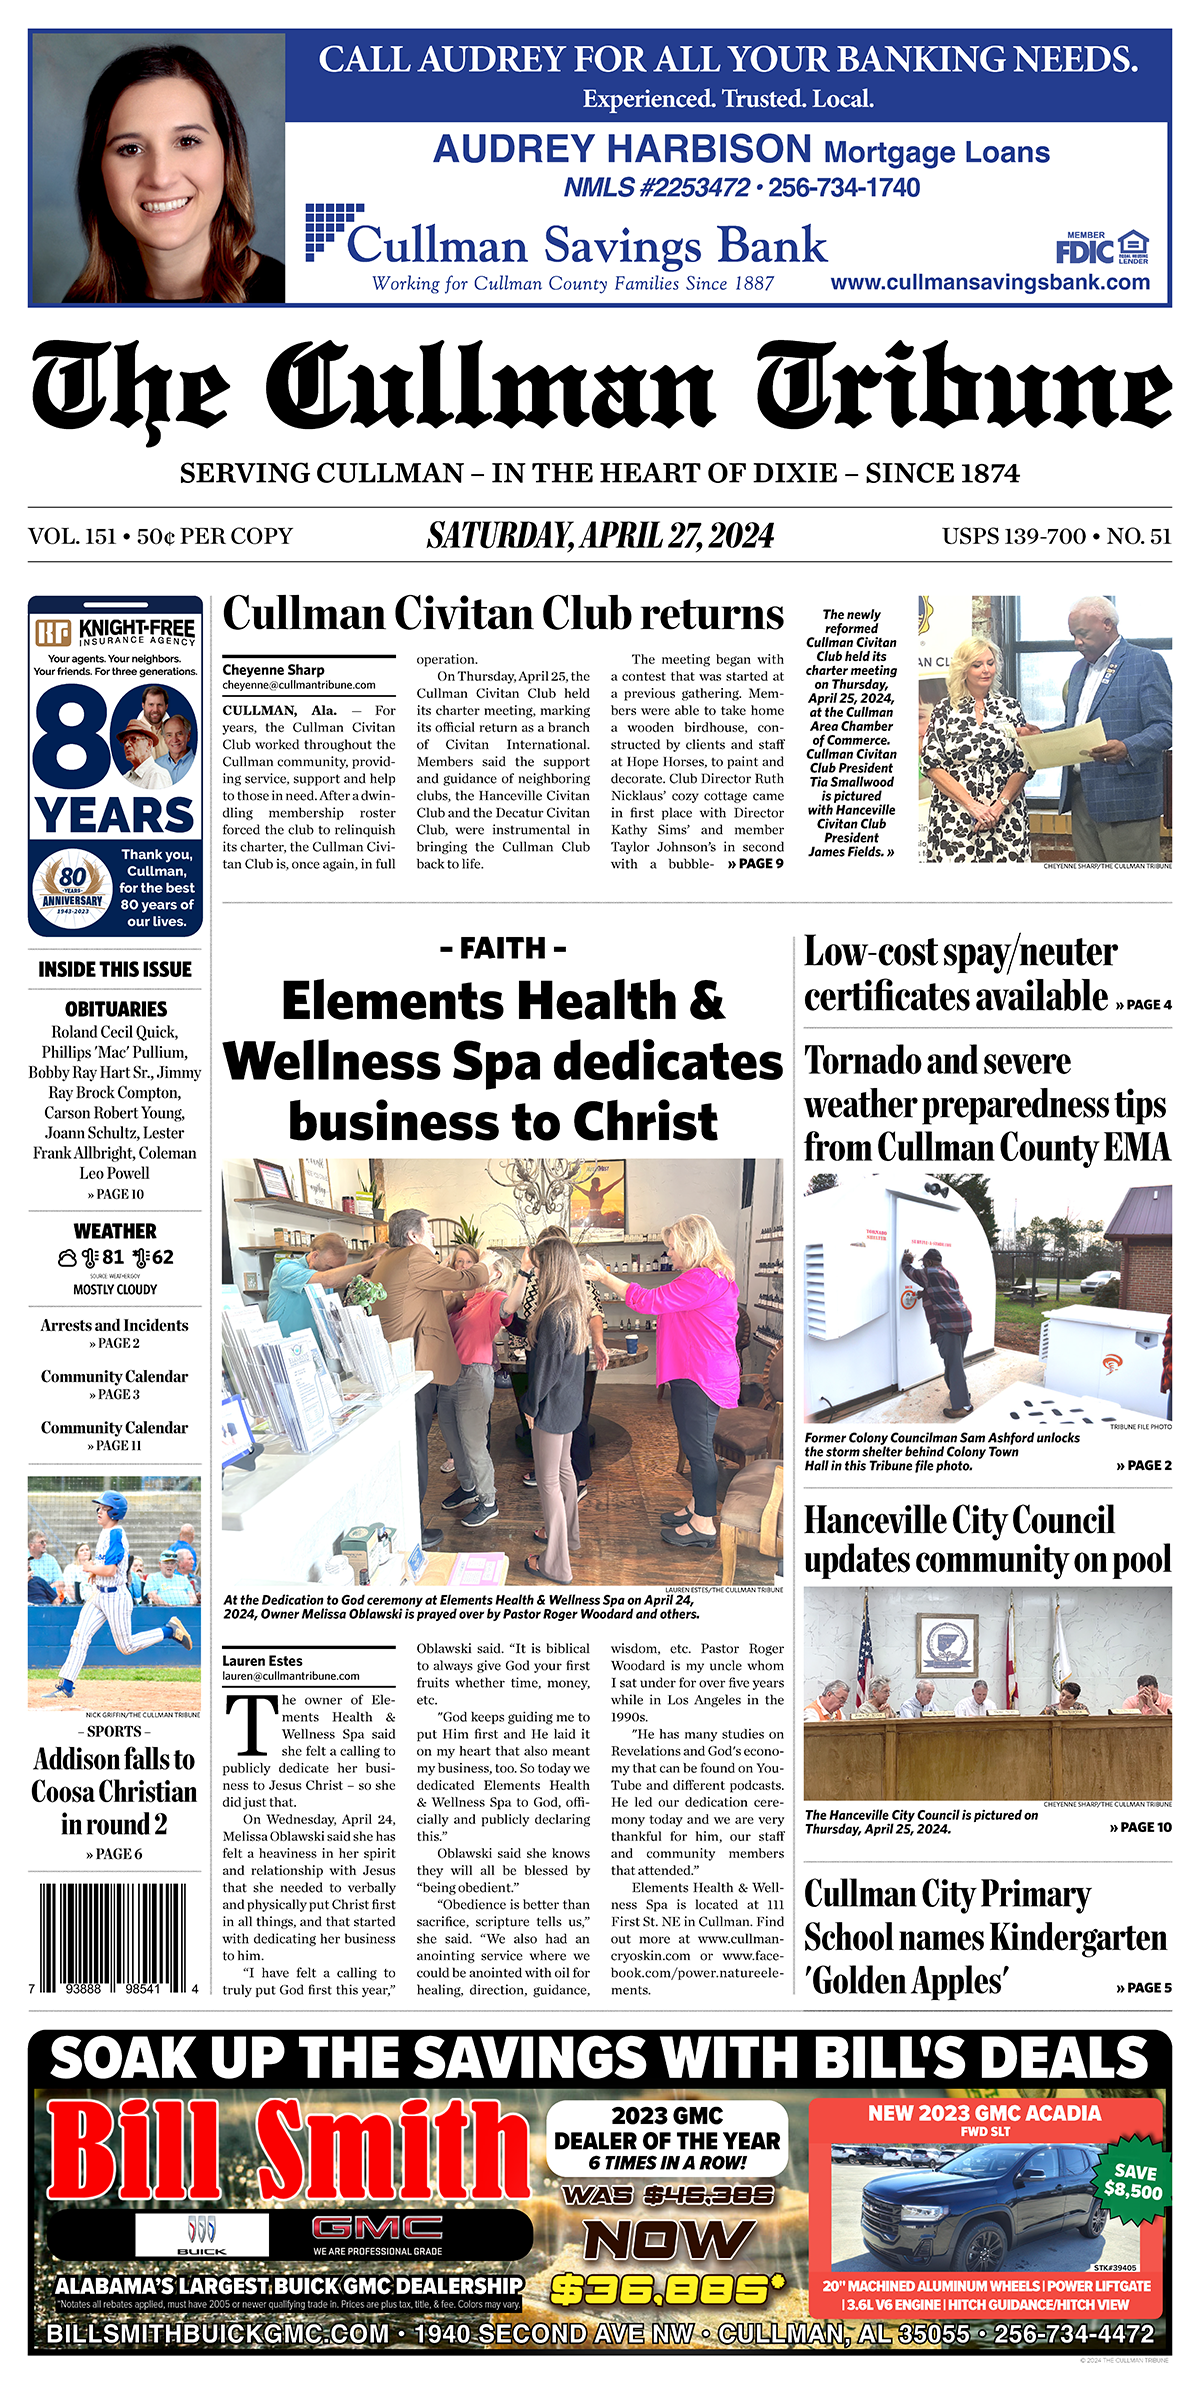 Good Morning Cullman! The 04-27-2024 edition of the Cullman Tribune is now ready to view.